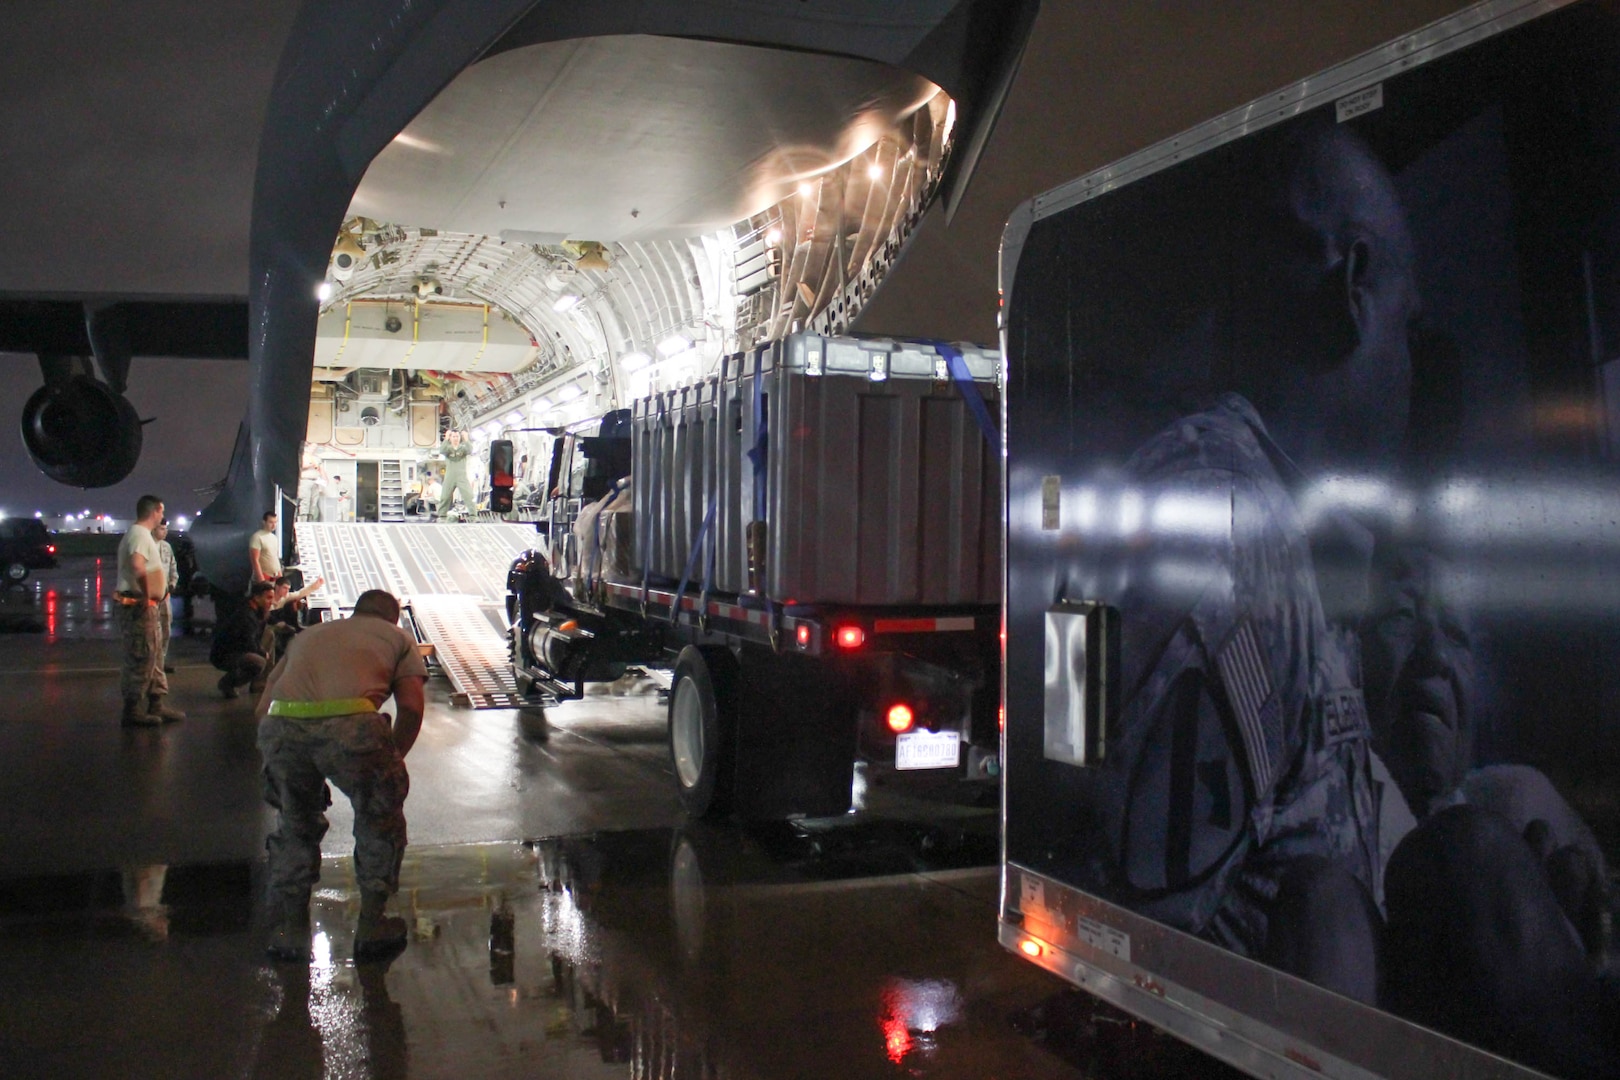 Airmen from the 123rd Airlift Wing load a Disaster Relief Mobile Kitchen Trailer onto a C-17 Globemaster III aircraft at the Kentucky Air National Guard Base in Louisville, Ky., Oct. 11, 2017, to be transported to San Juan, Puerto Rico. Seven Airmen from the wing’s 123rd Services Flight will employ the trailer to serve up to 4,000 hot meals per day to hurricane relief forces. (U.S. Air National Guard photo by Lt. Col. Katrina Bramlett)